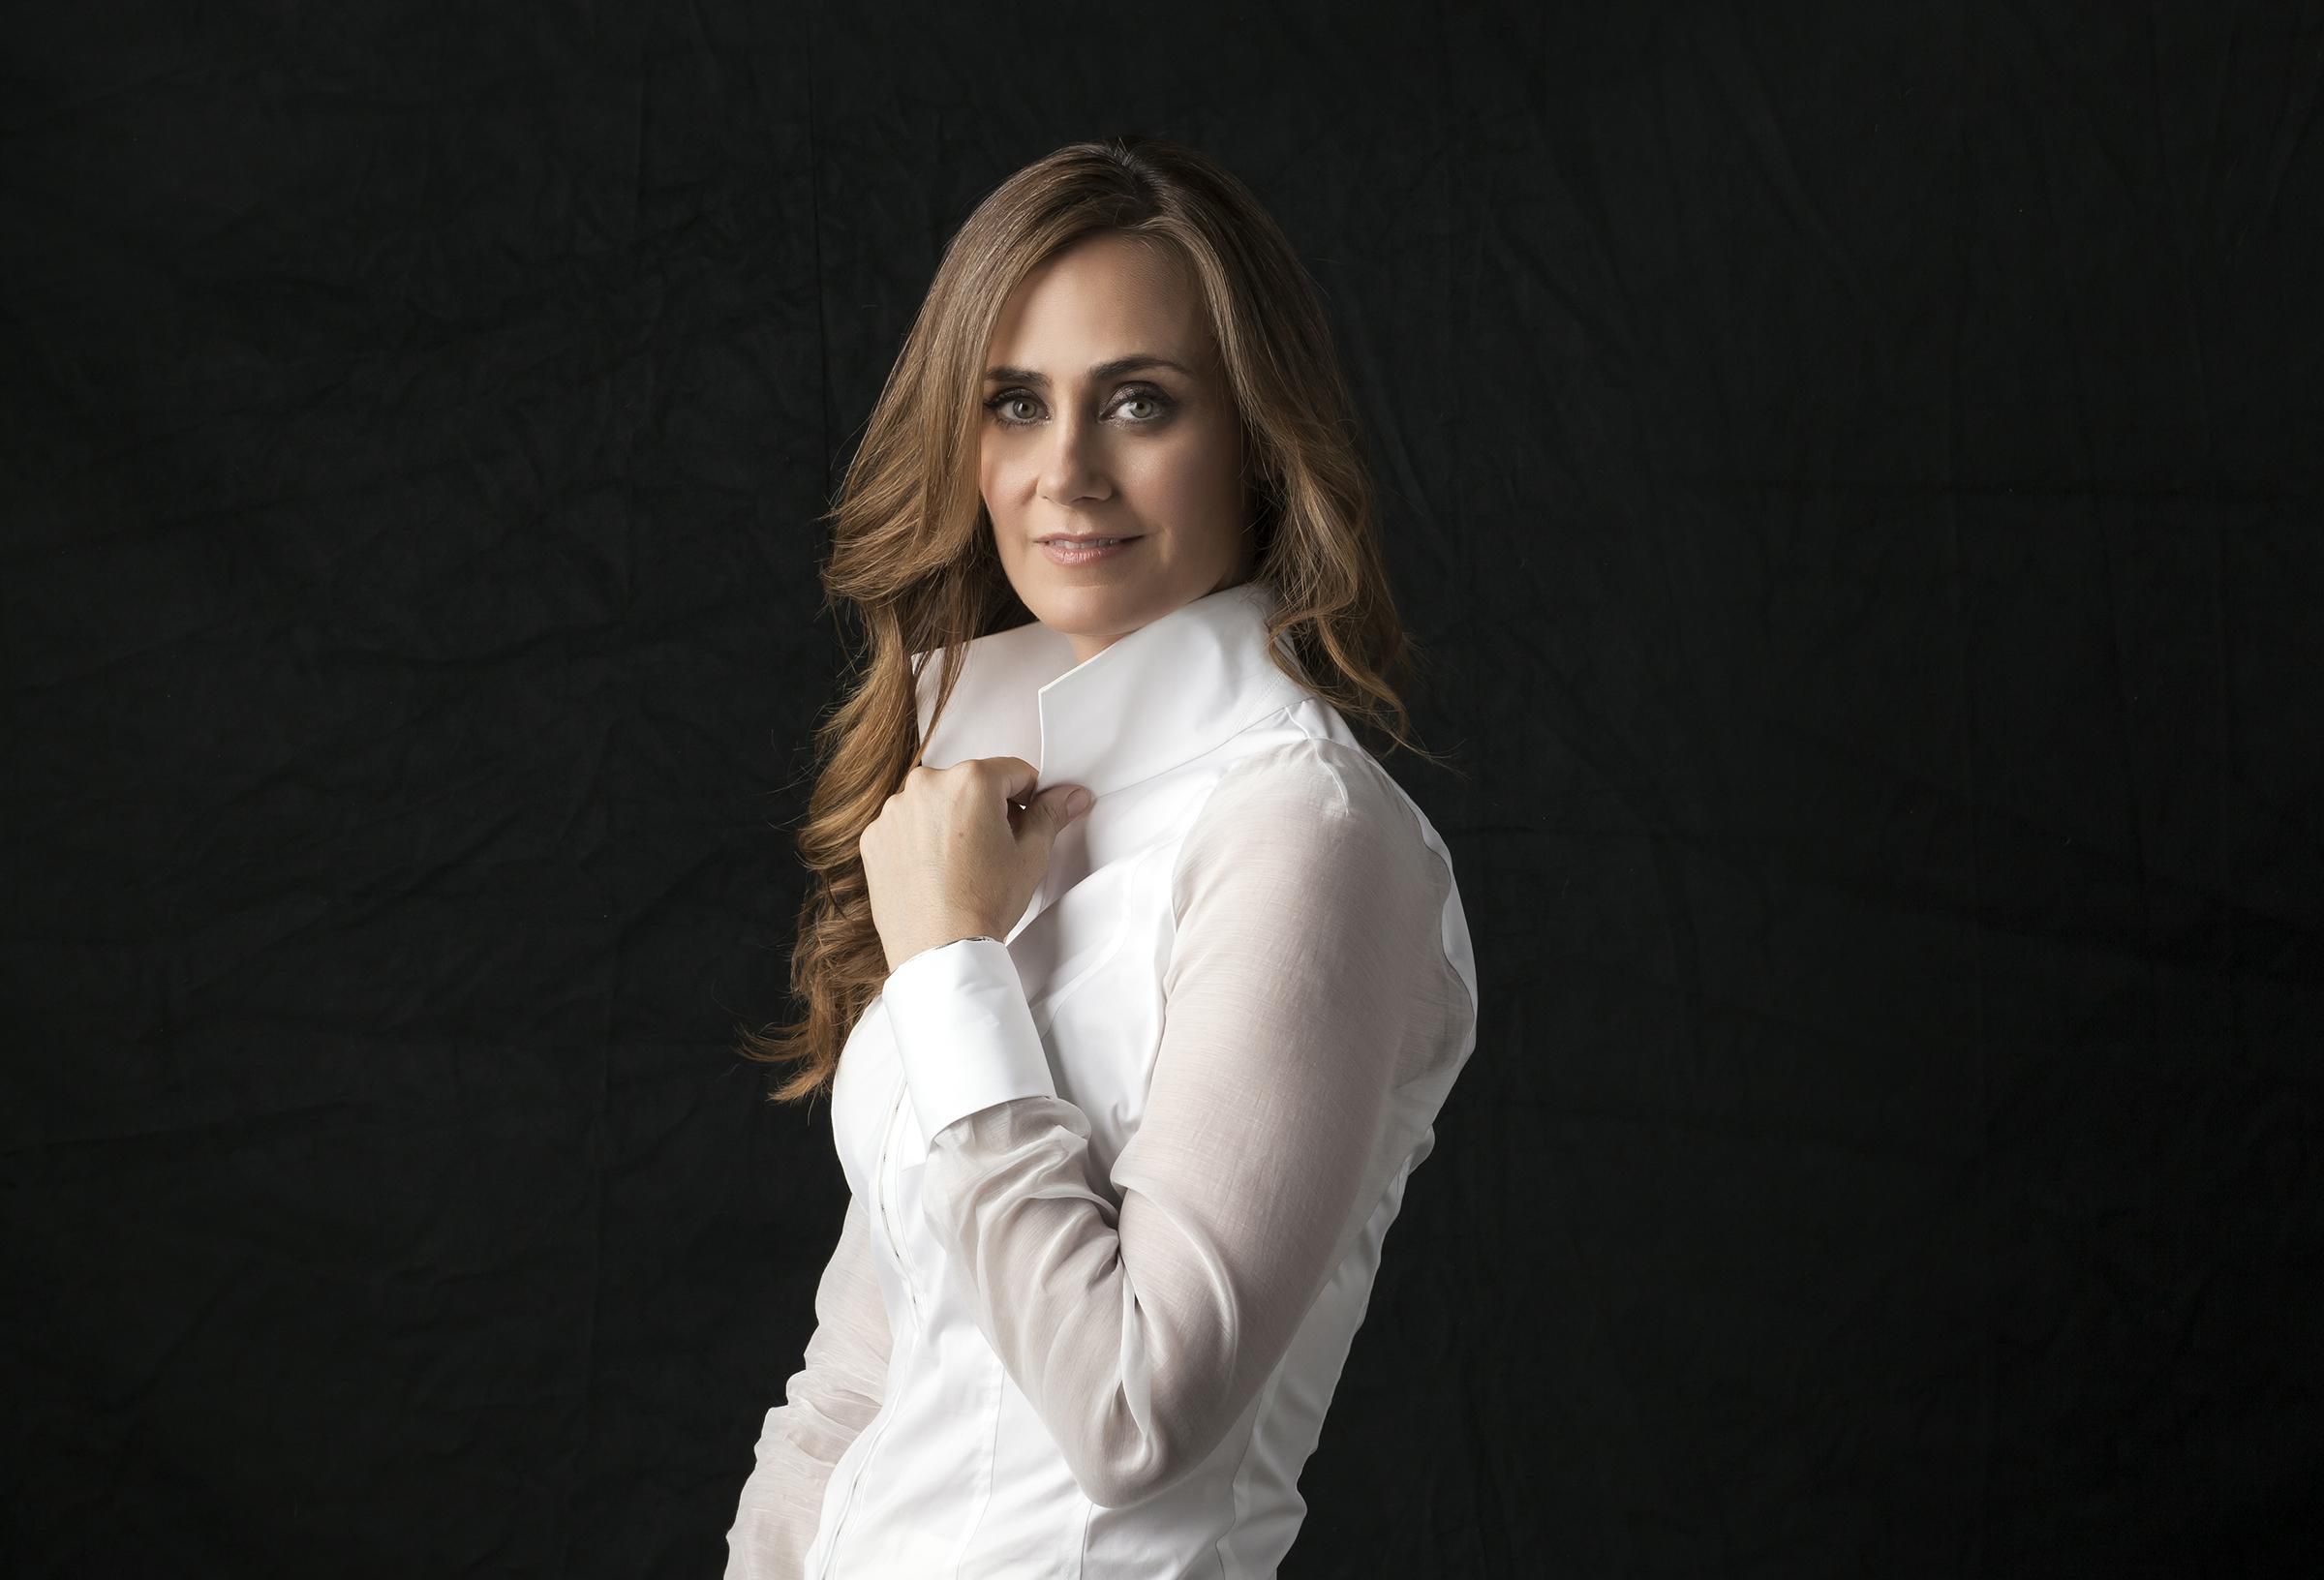 Actress Diane Farr of the new CBS series Fire Country wears a high collared white shirt against a charcoal backdrop.